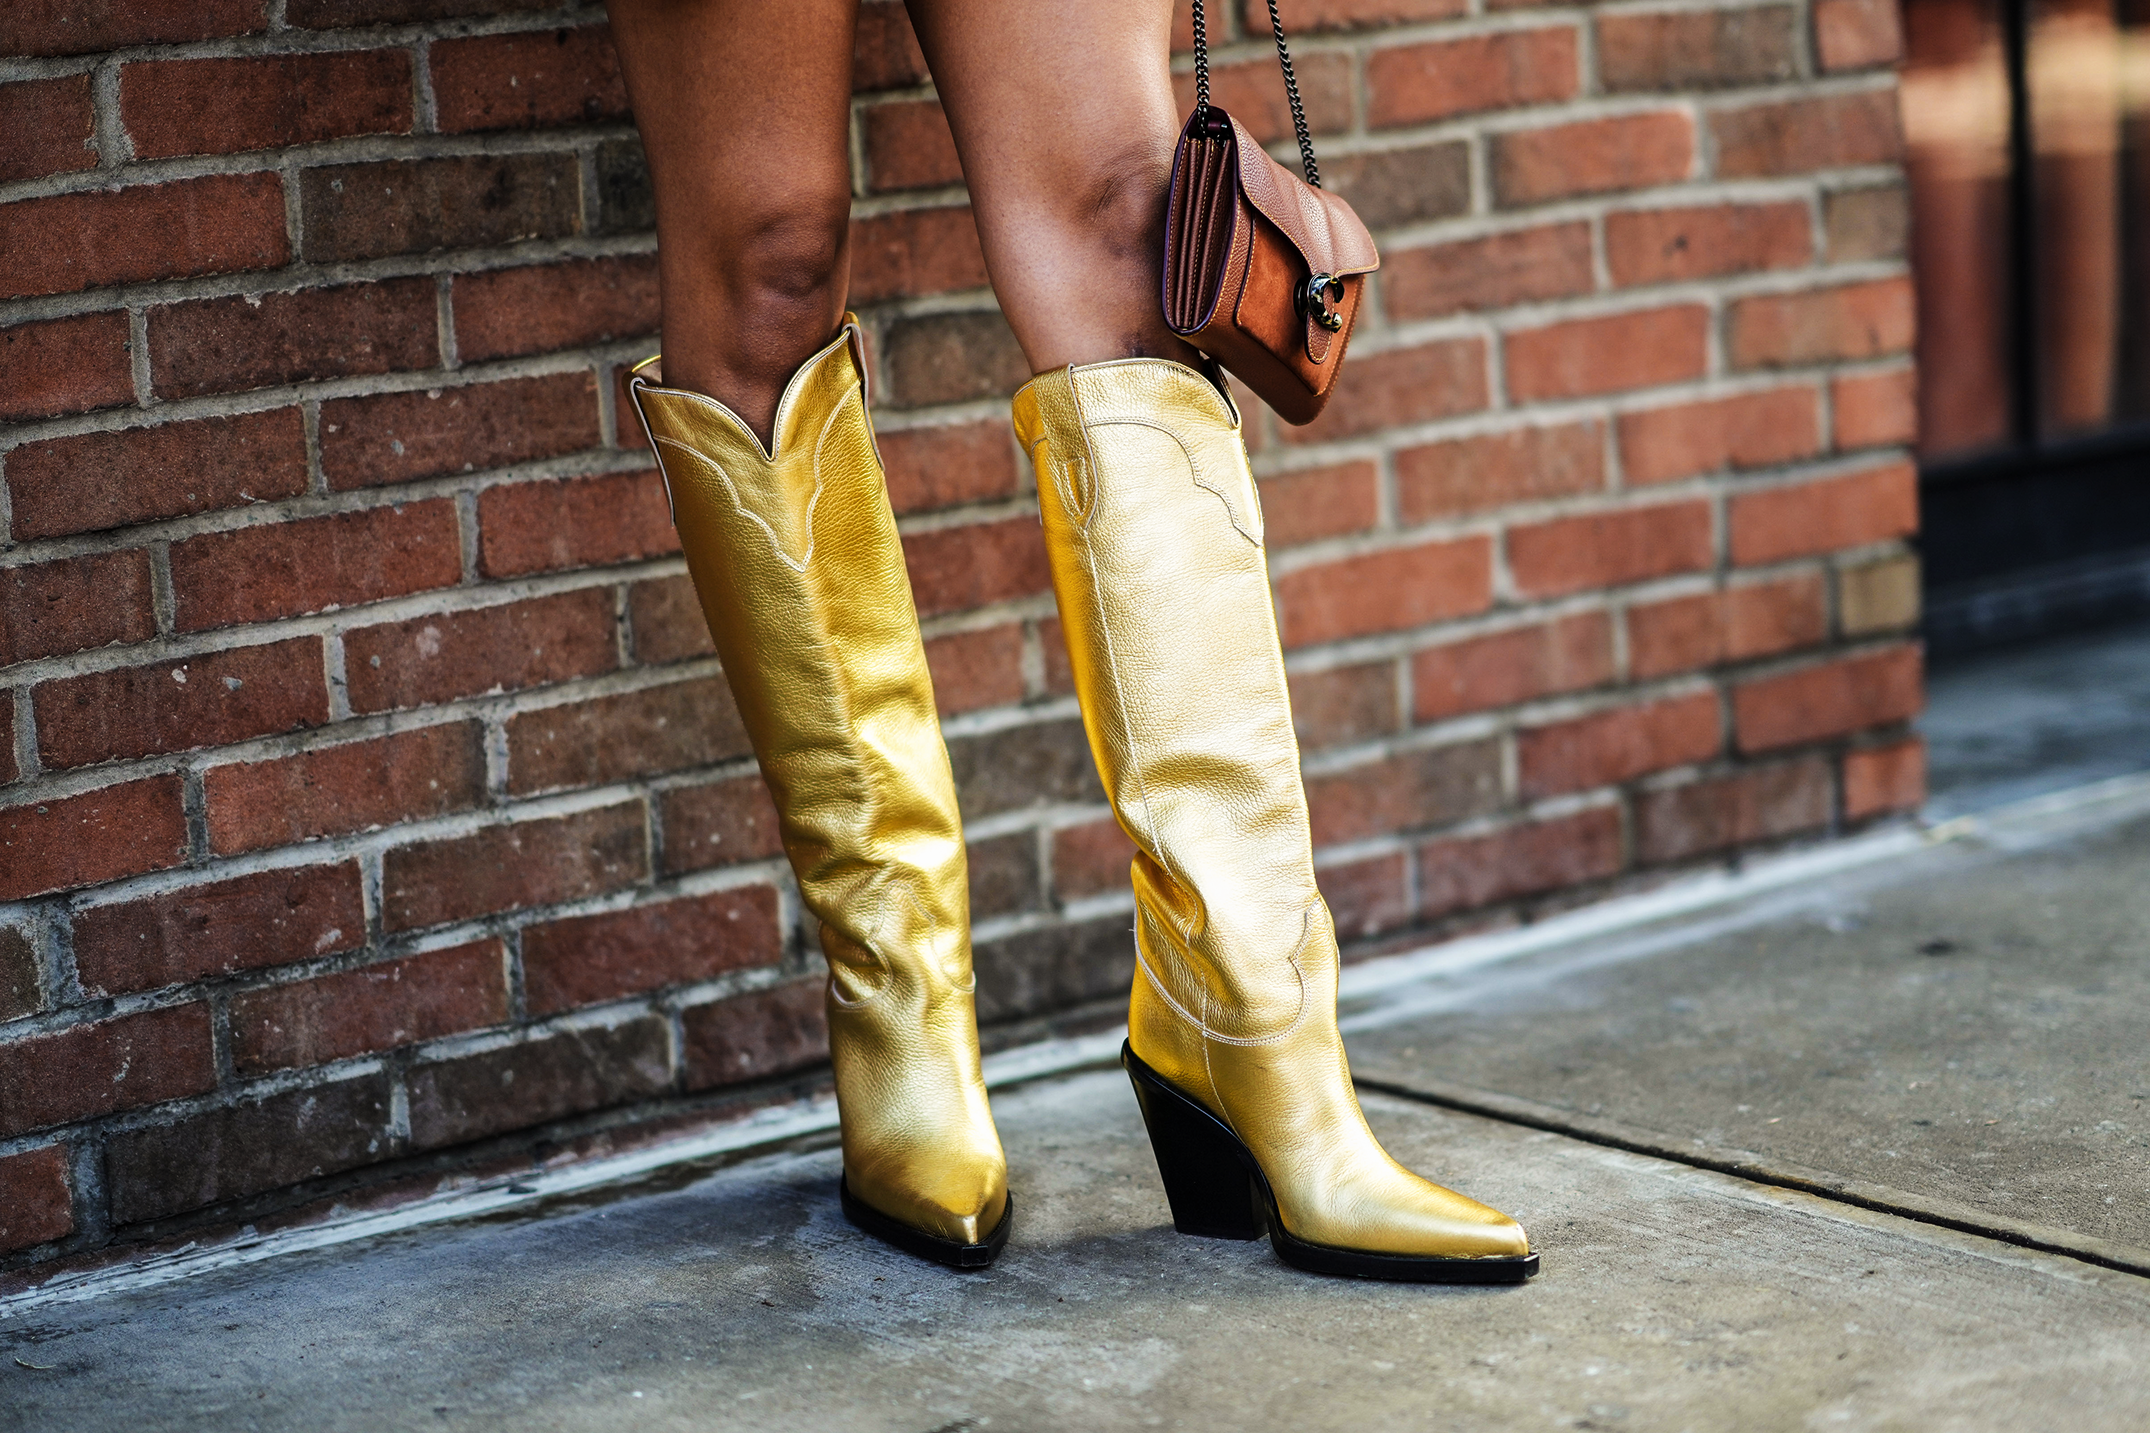 The 25 Best Women's Cowboy Boots to Giddy Up in and Wear All Fall Long